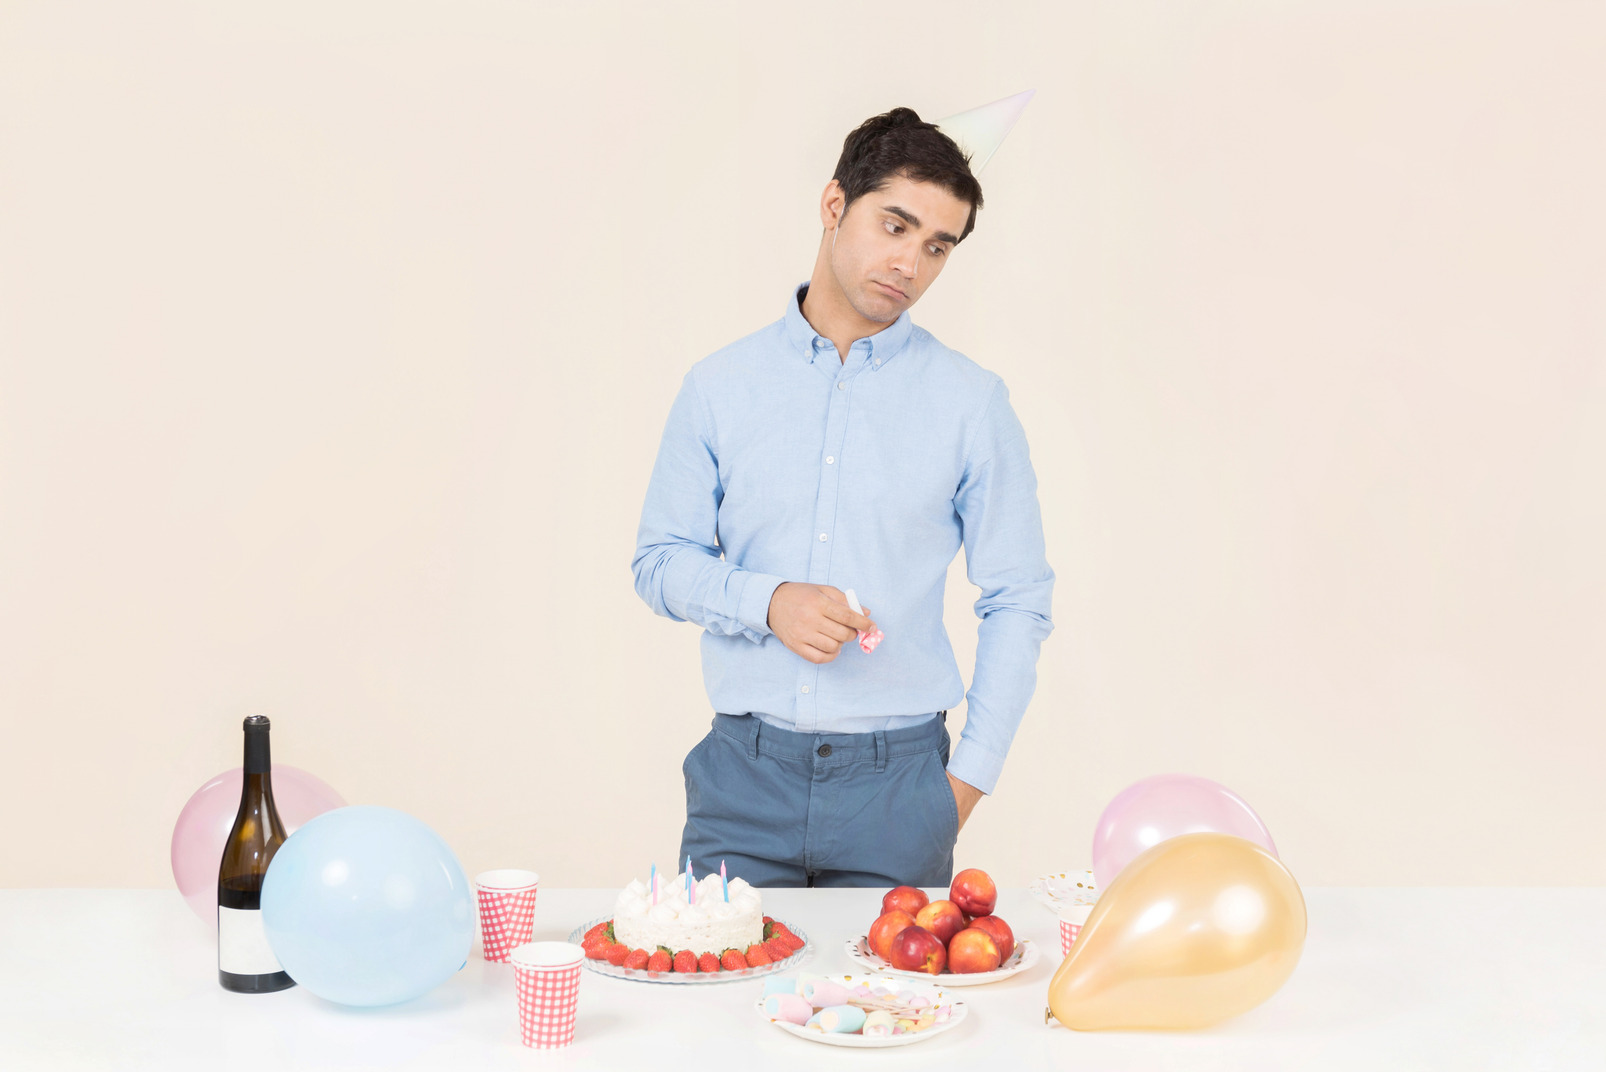 Young caucasian man standing near birthday table